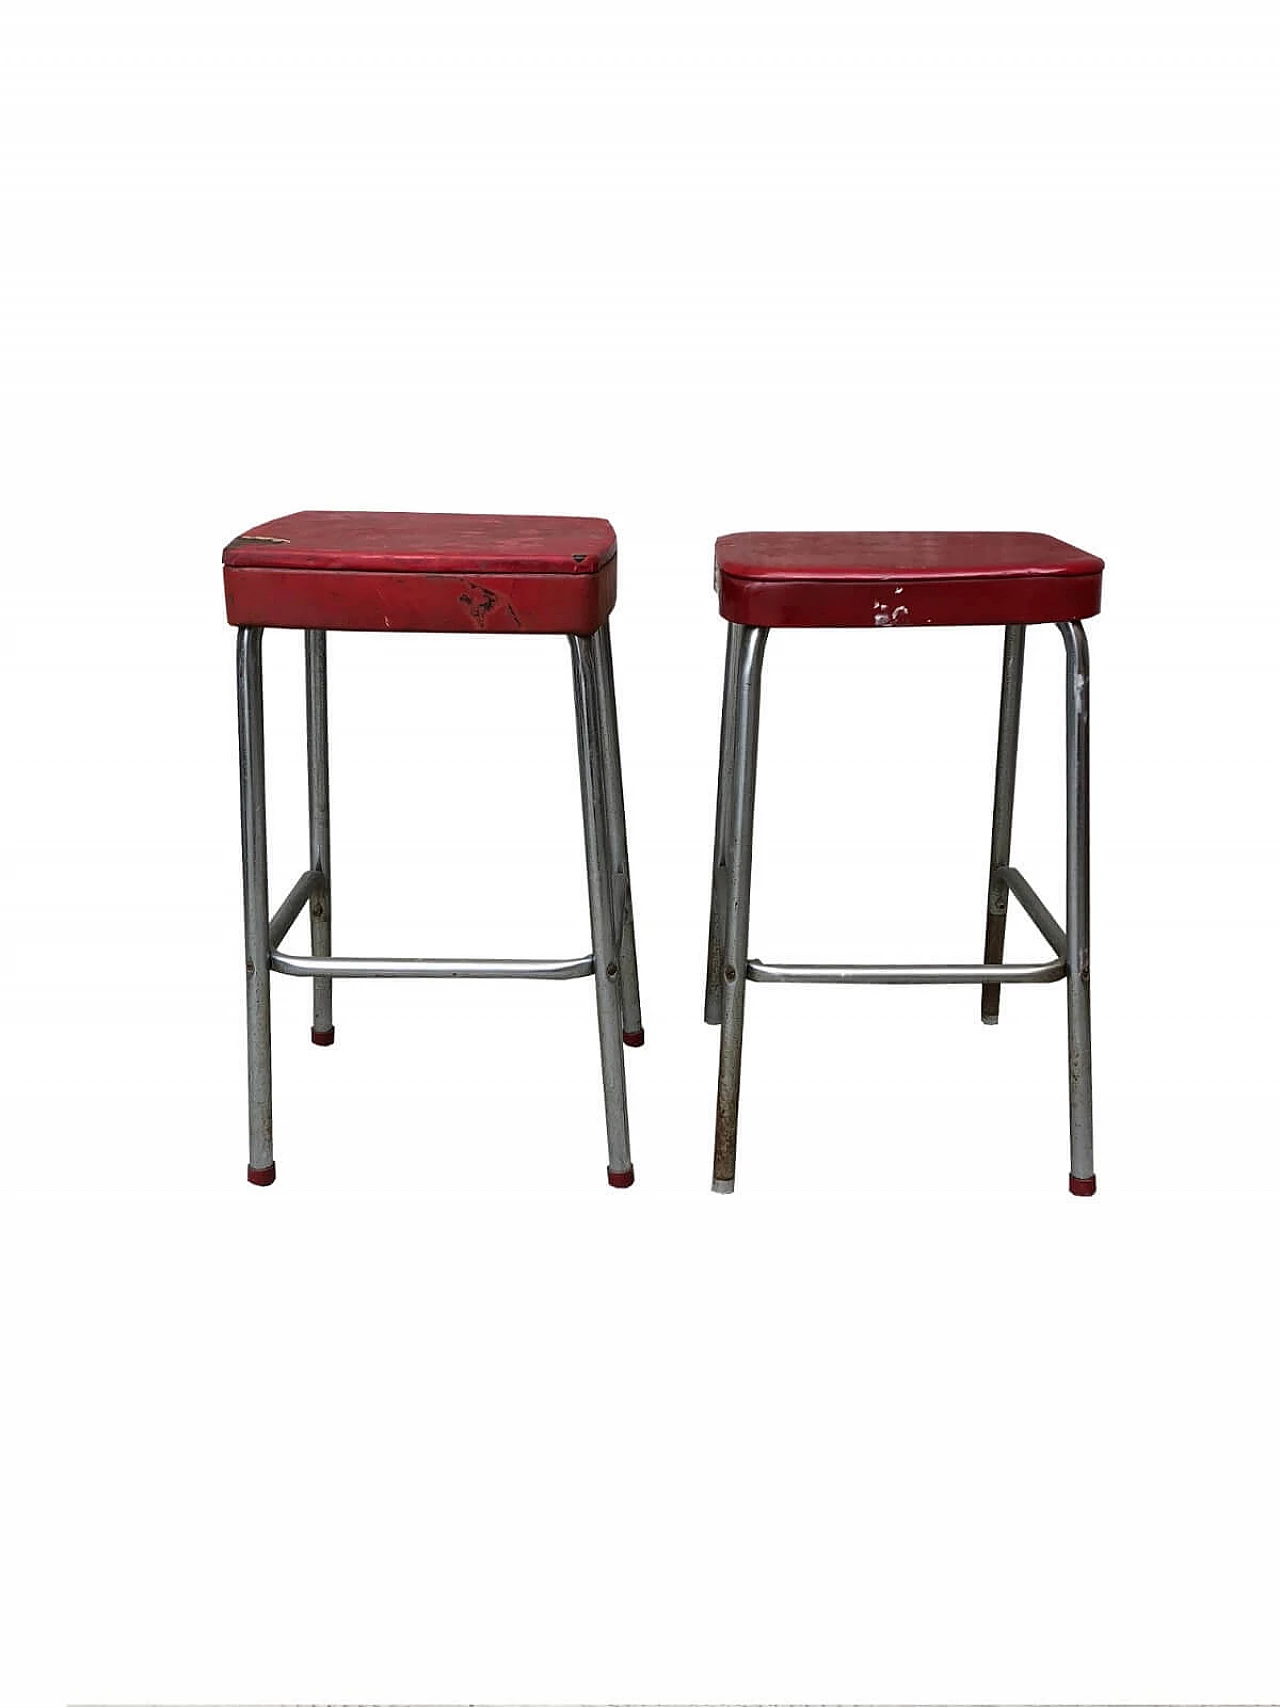 Red vintage kitchen stools "American style", 60's 1